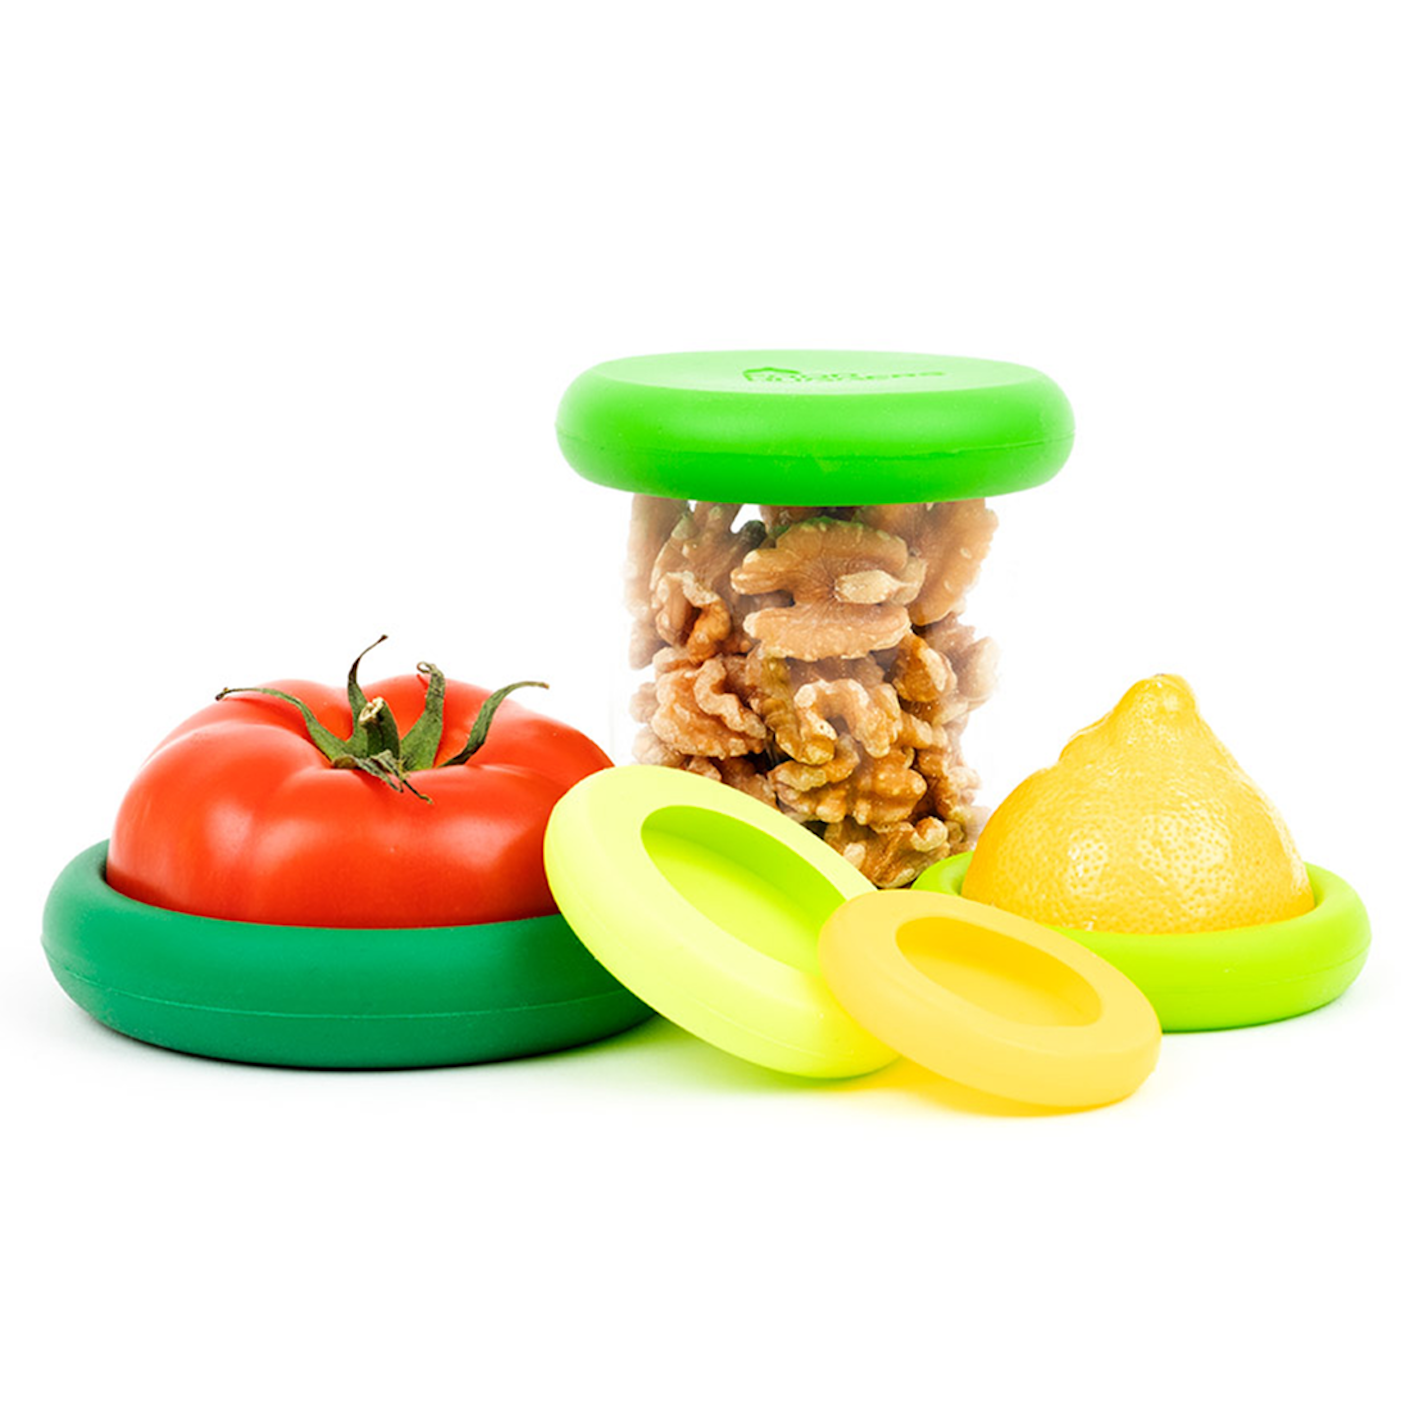 Three clear food storage containers full of food have bright green, twist-on lids.